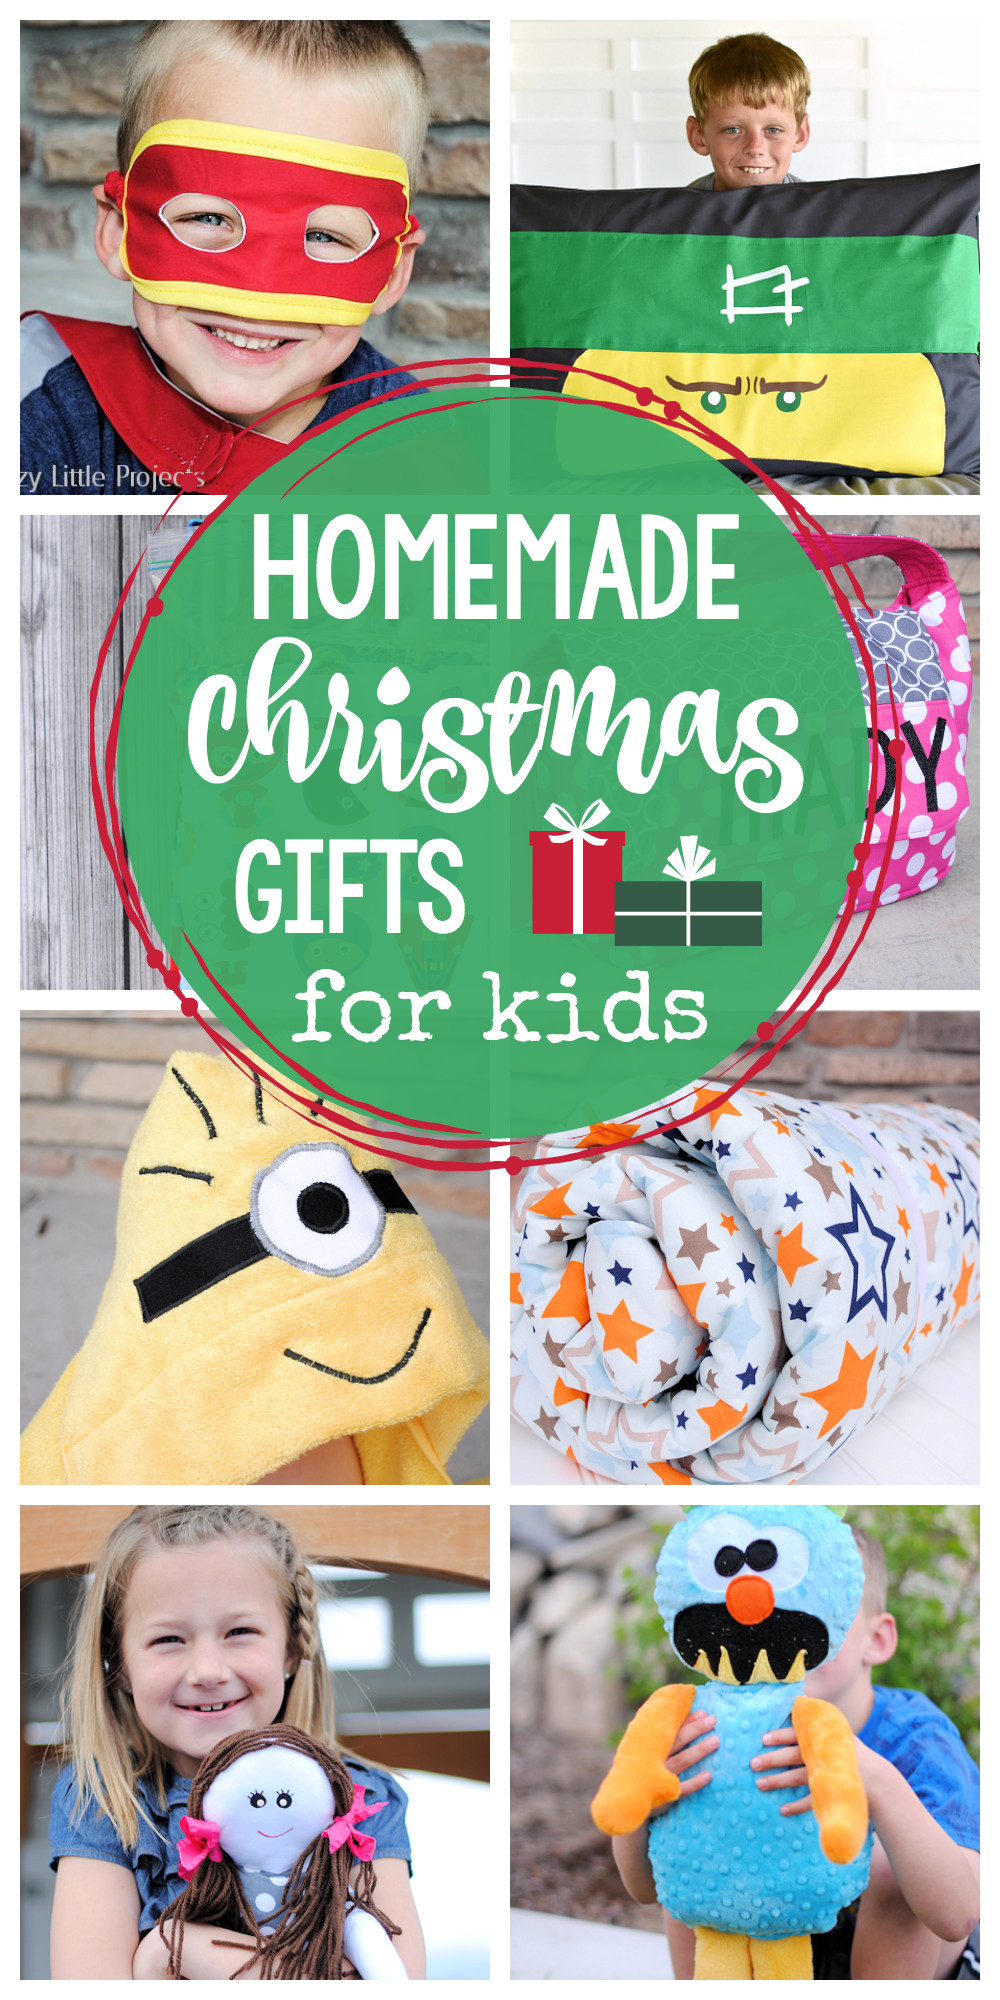 Fun Gift Ideas For Kids
 25 Homemade Christmas Gifts for Kids Crazy Little Projects